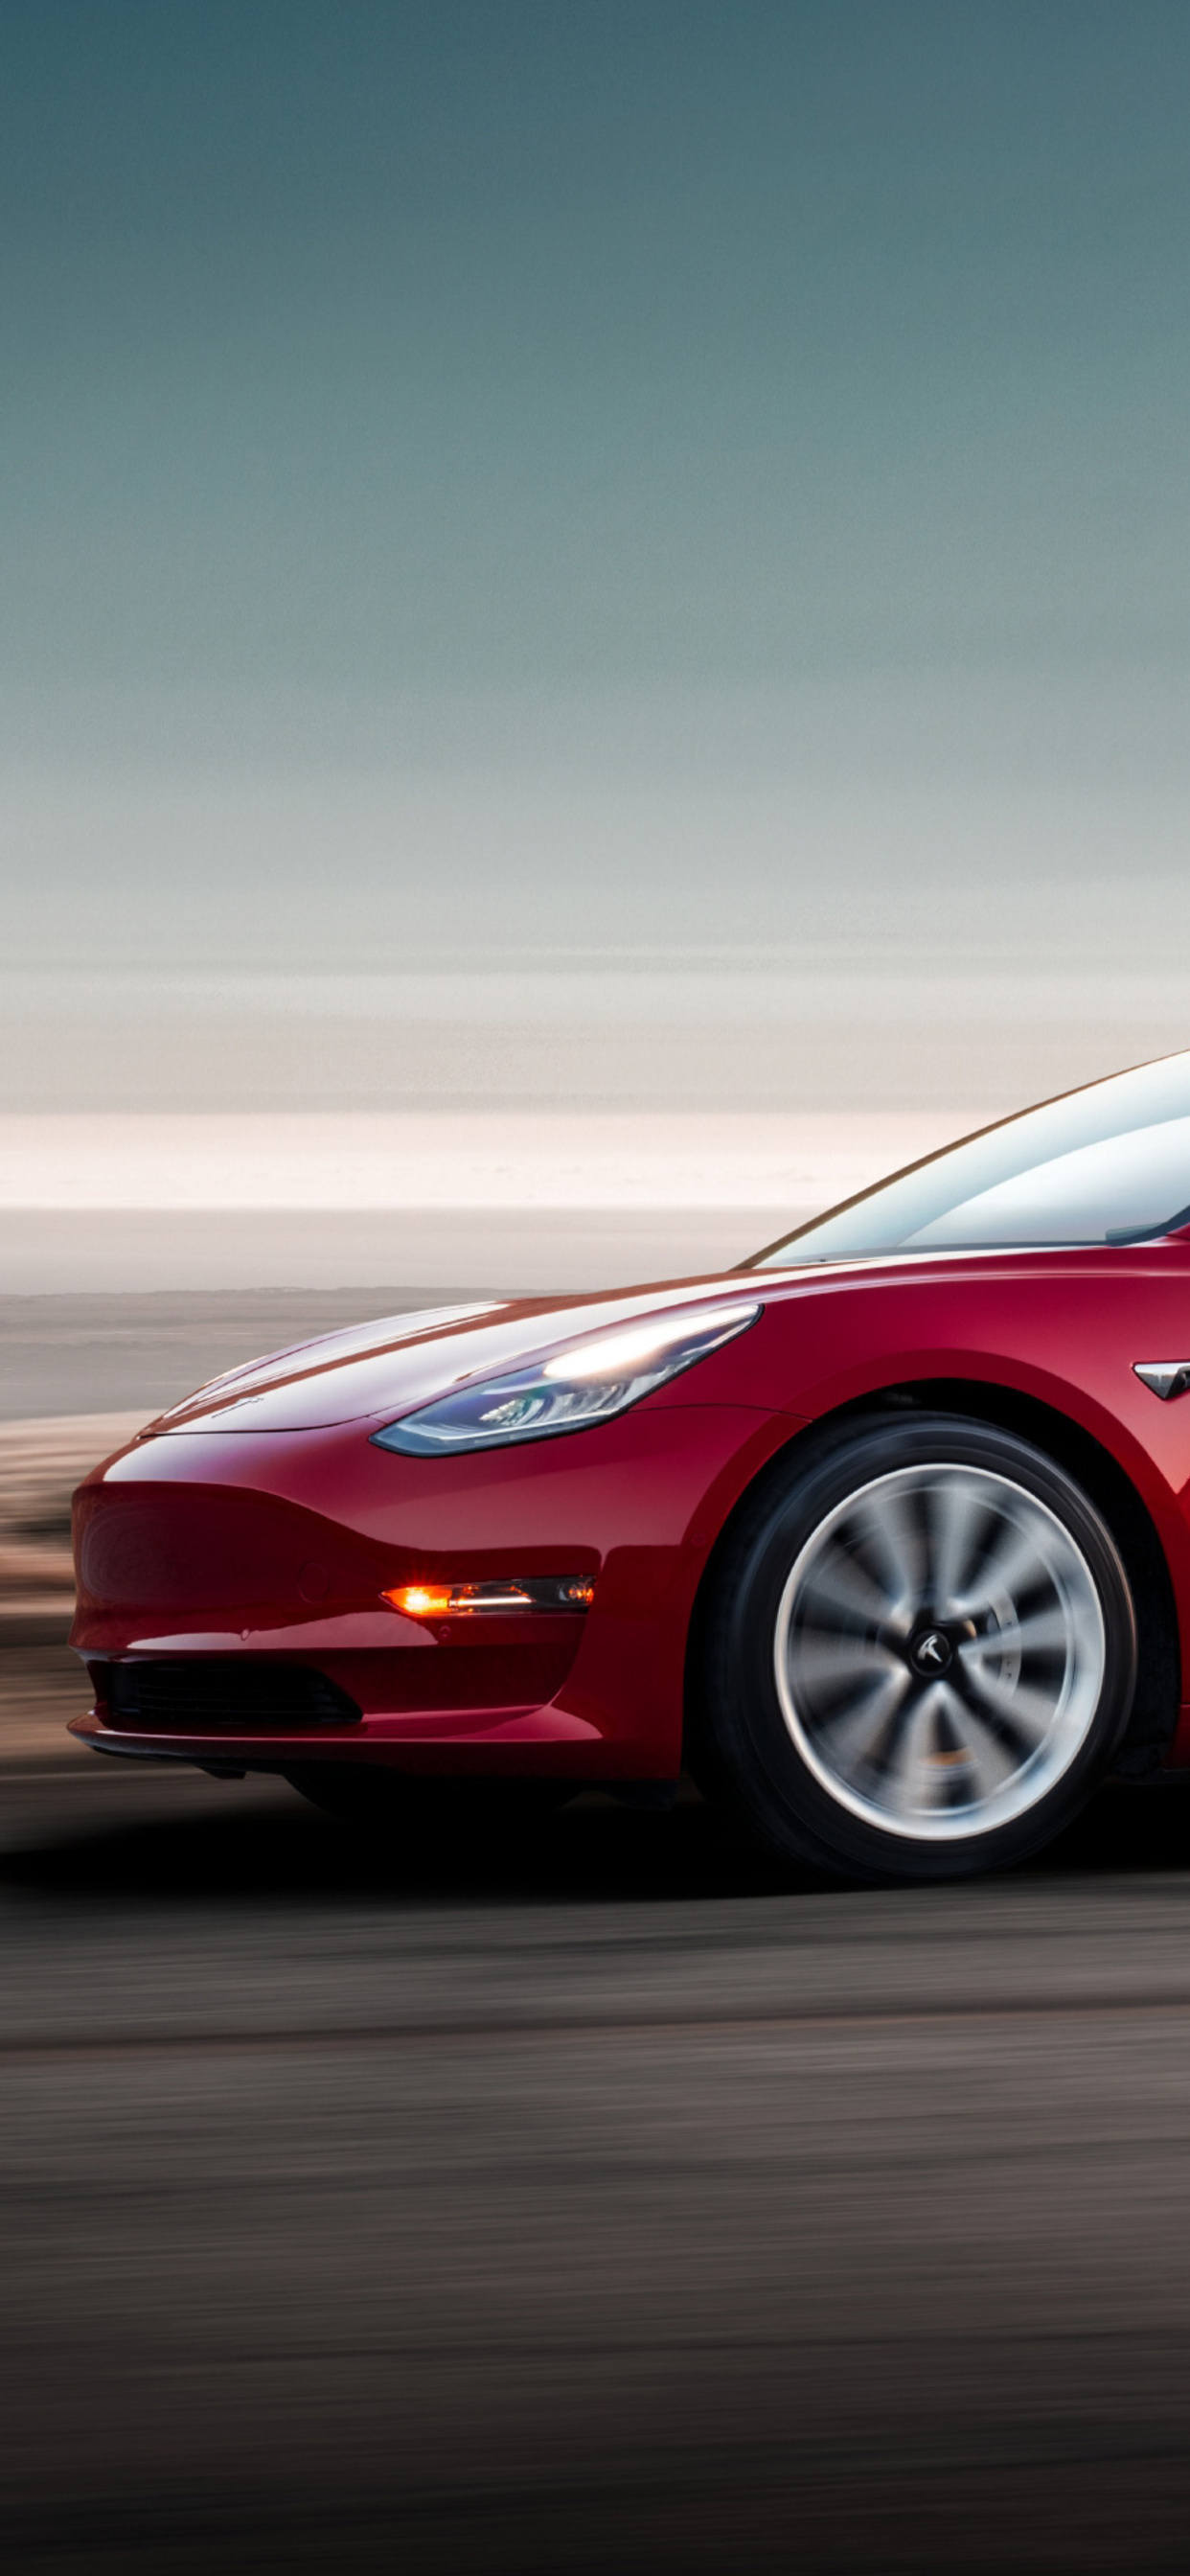 1242x2688 2018 Tesla Model 3 Iphone Xs Max Hd 4k Wallpapers Images